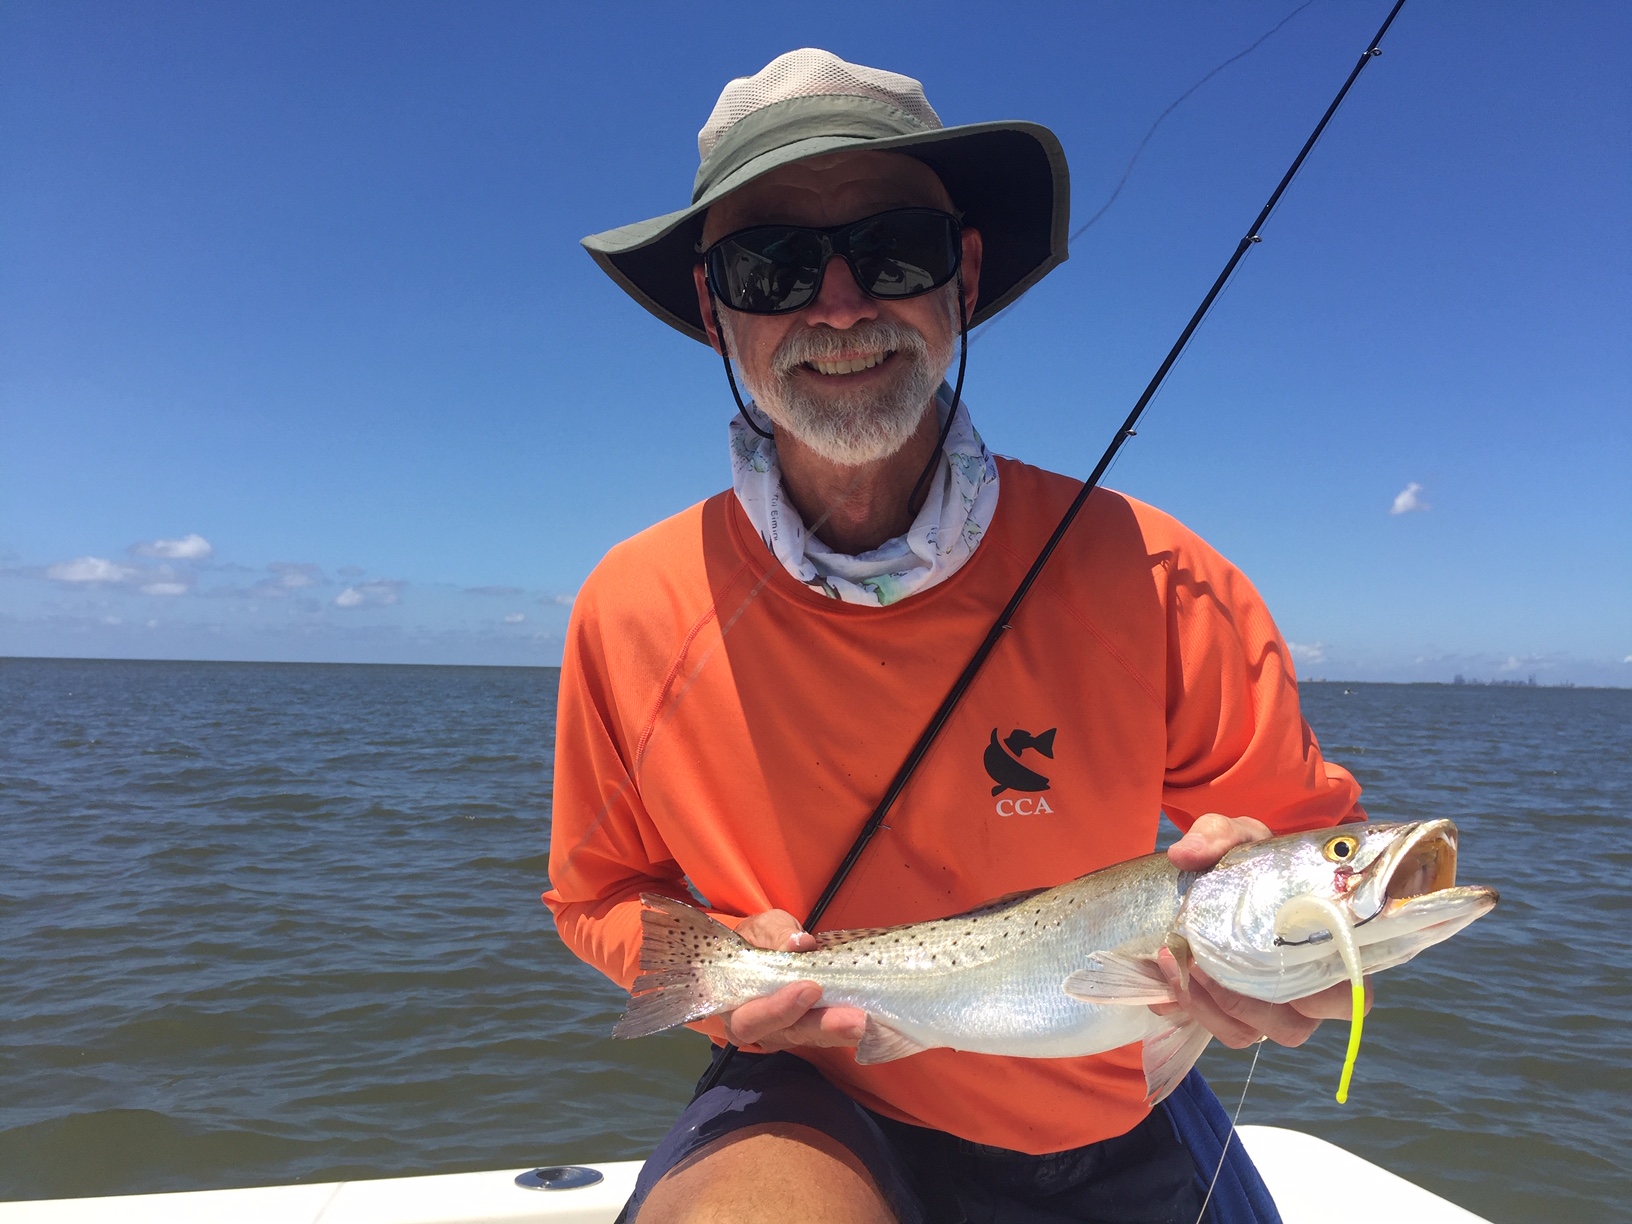 Speckled trout fishing with the slick lure leads to a successful day out on the water